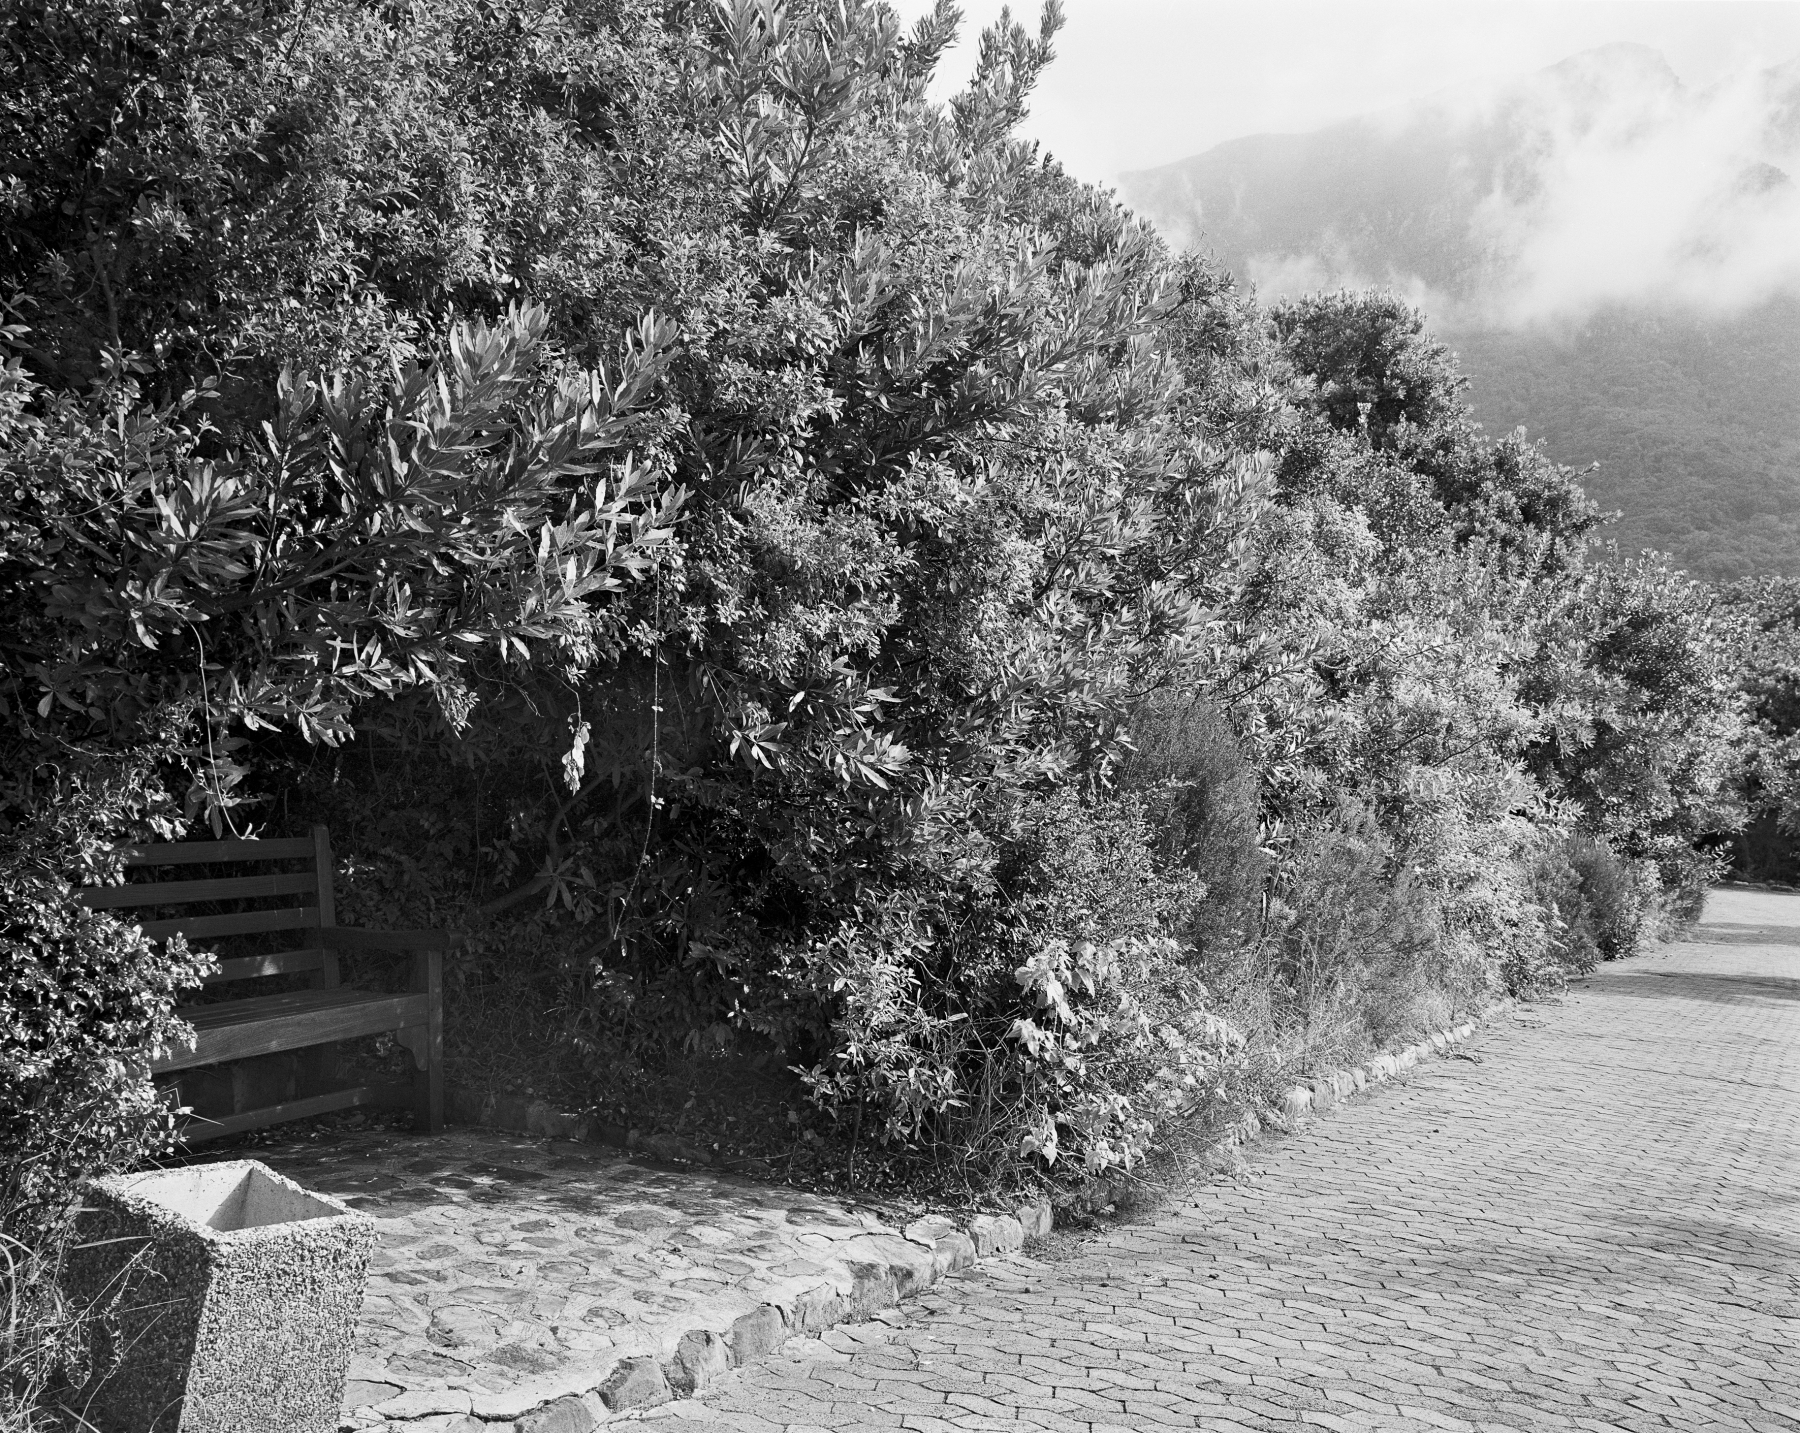 David Goldblatt

Remnant of a wild almond hedge planted in 1660 to prevent livestock from being taken out of the European settlement in South Africa by the indigenous Khoi. Kirstenbosch, Cape Town, 16 May 1993&amp;nbsp;

Silver gelatin handprint

Sales enquiries
&amp;nbsp;